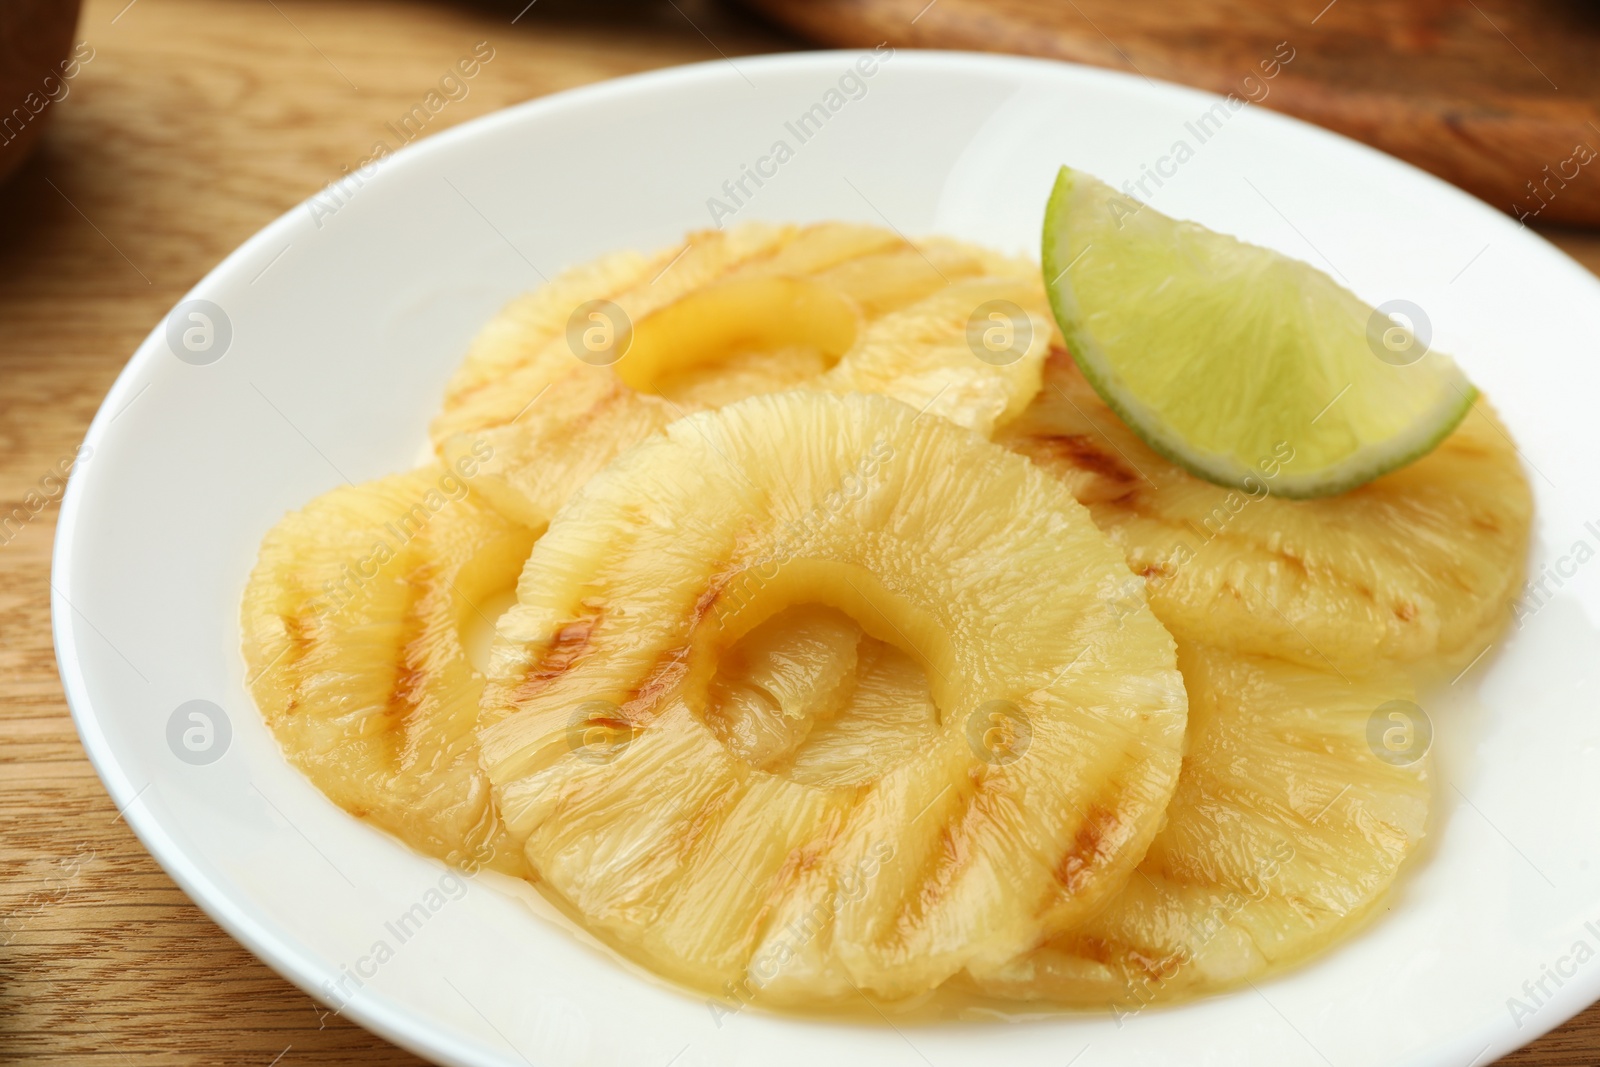 Photo of Tasty grilled pineapple slices and piece of lime on table, closeup